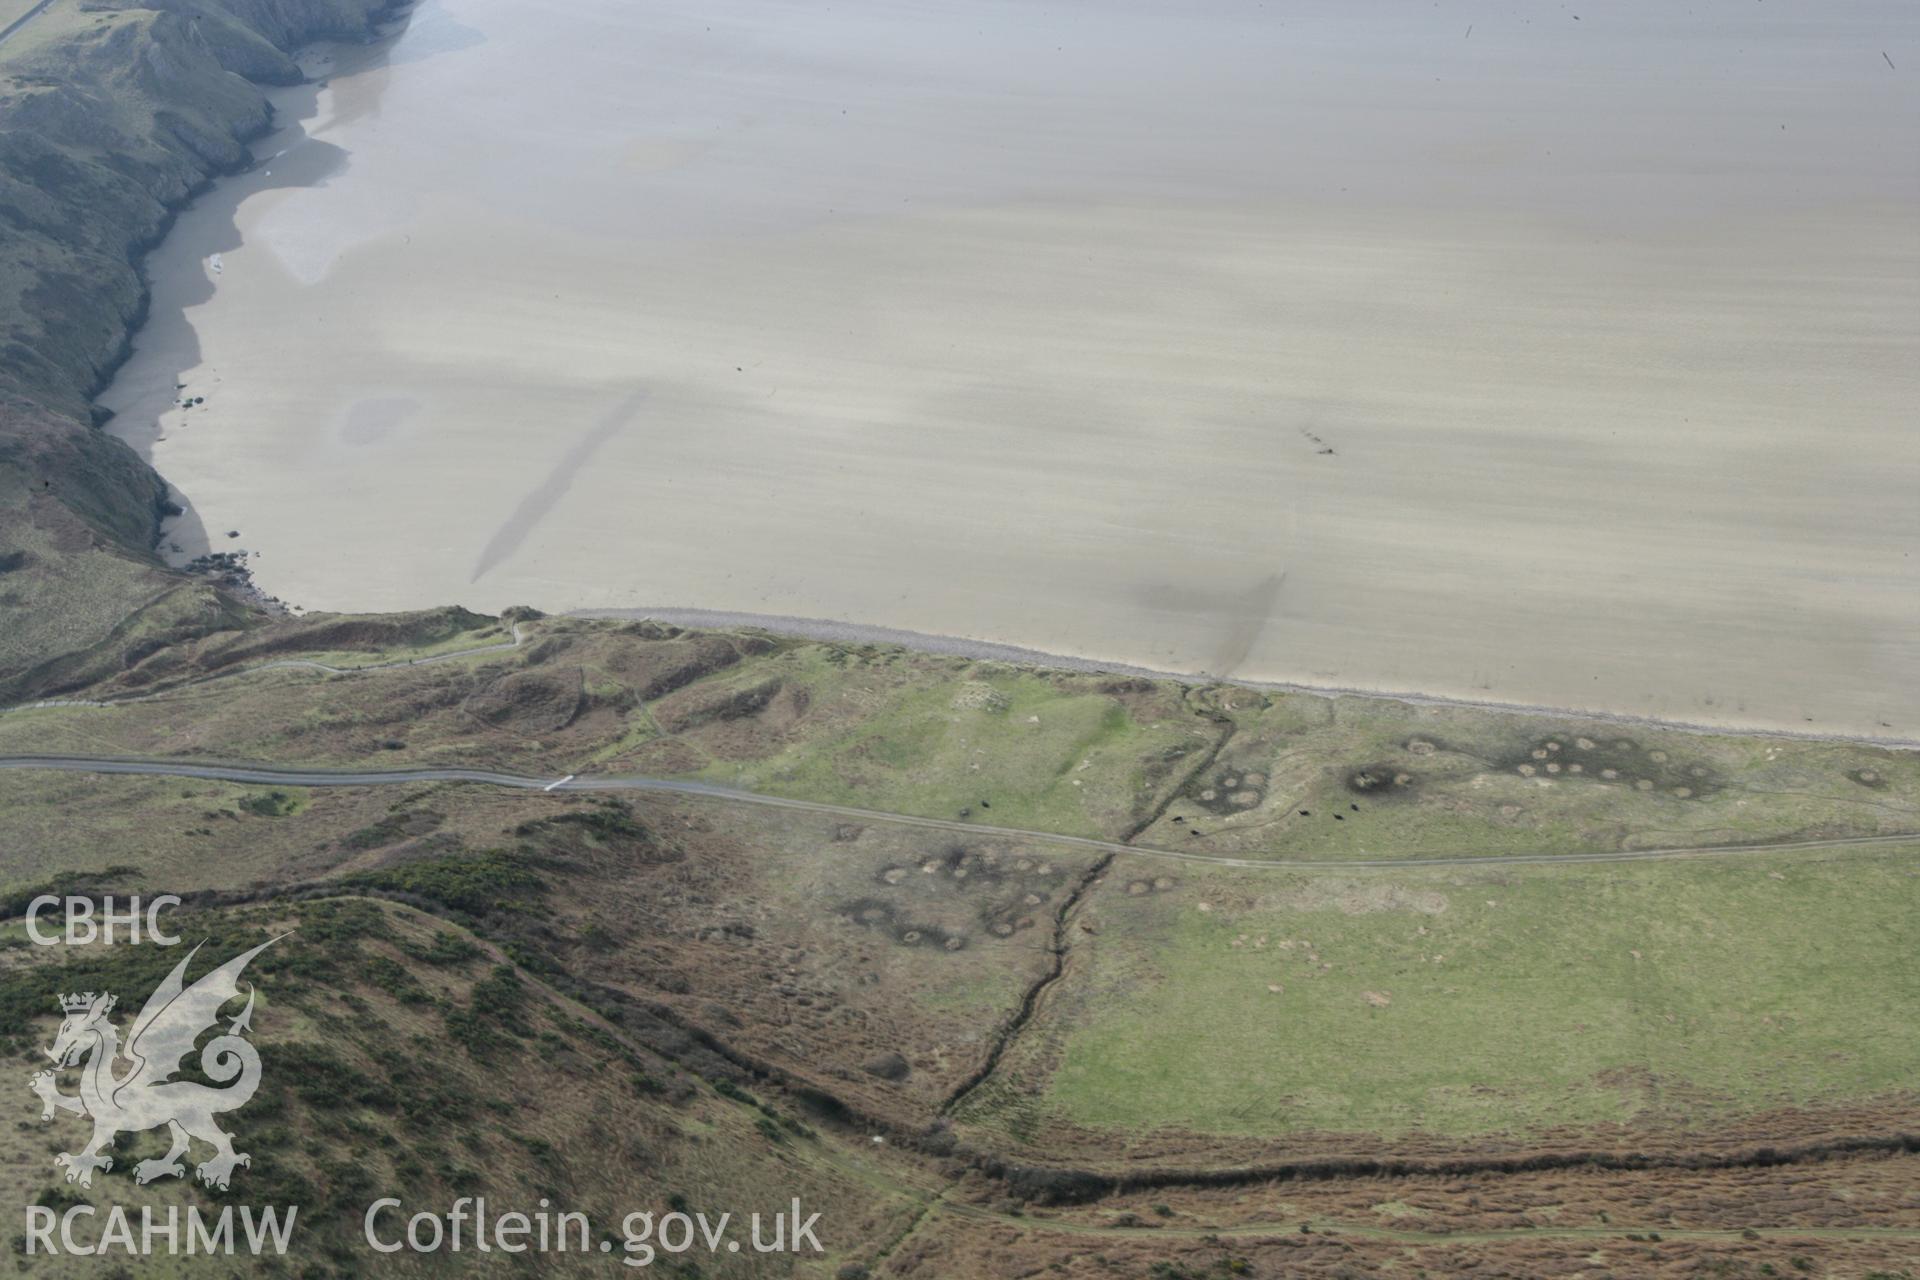 RCAHMW colour oblique photograph of Rhossili Medieval Settlement. Taken by Toby Driver on 02/03/2010.